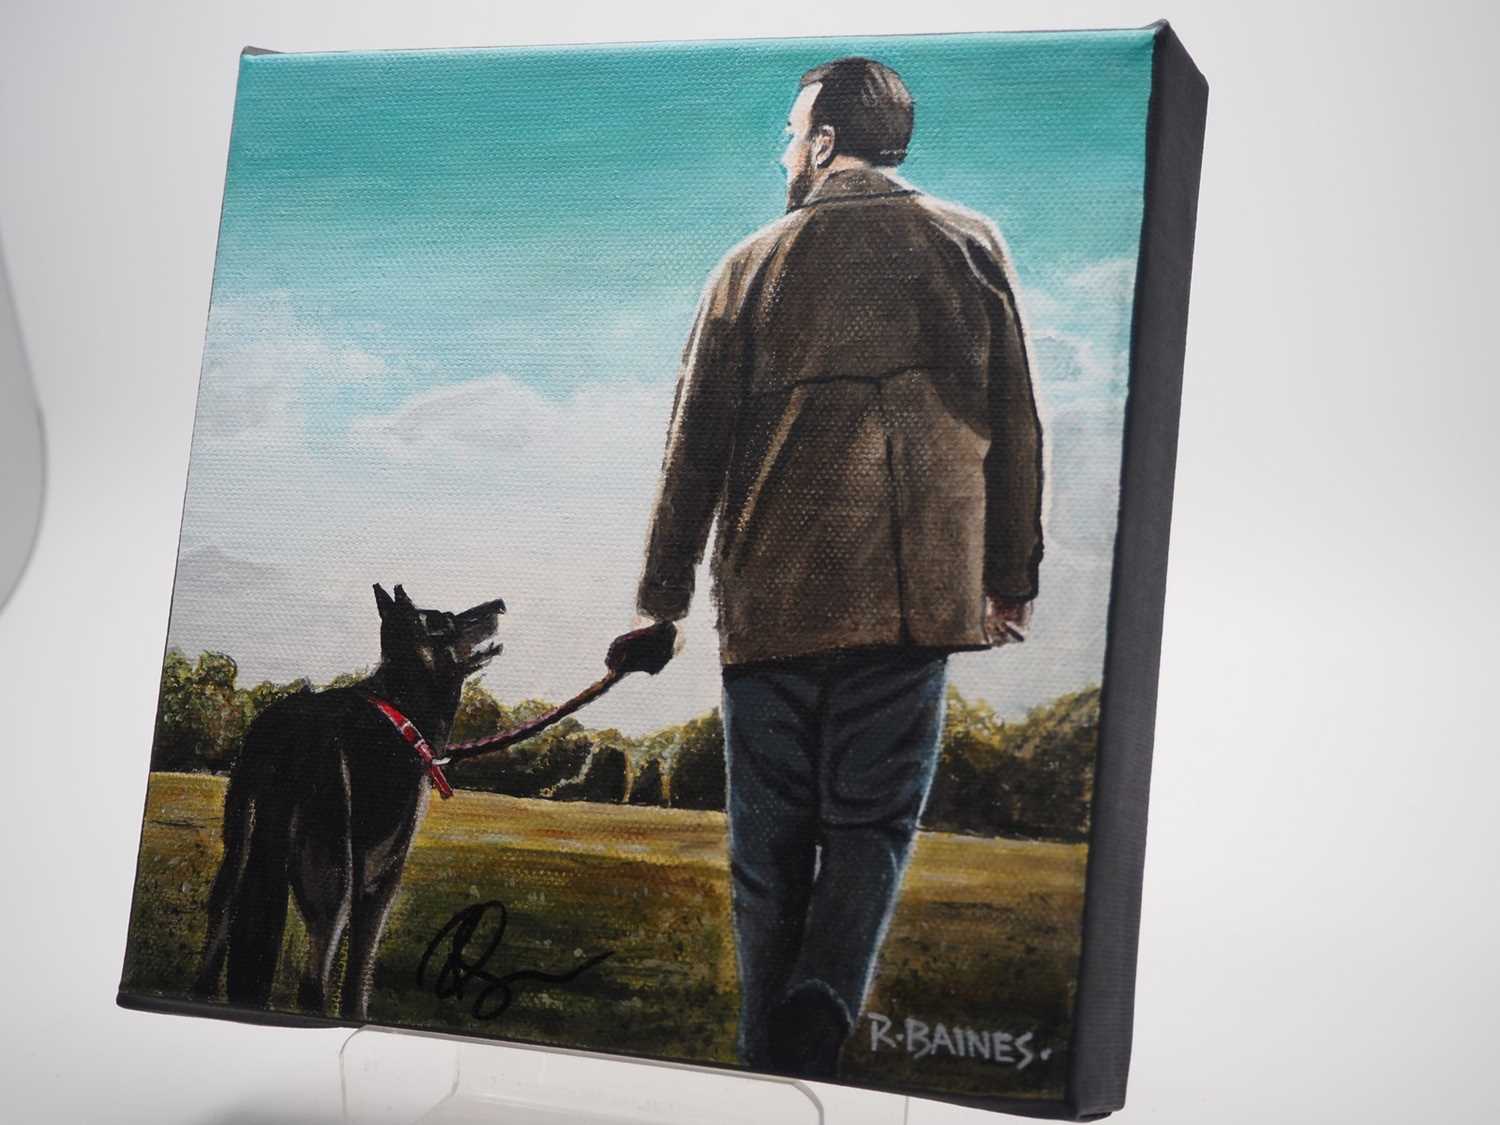 Ricky Gervais signed canvas with artwork added by Ross Baines - An iconic image of the end scene - Image 2 of 3